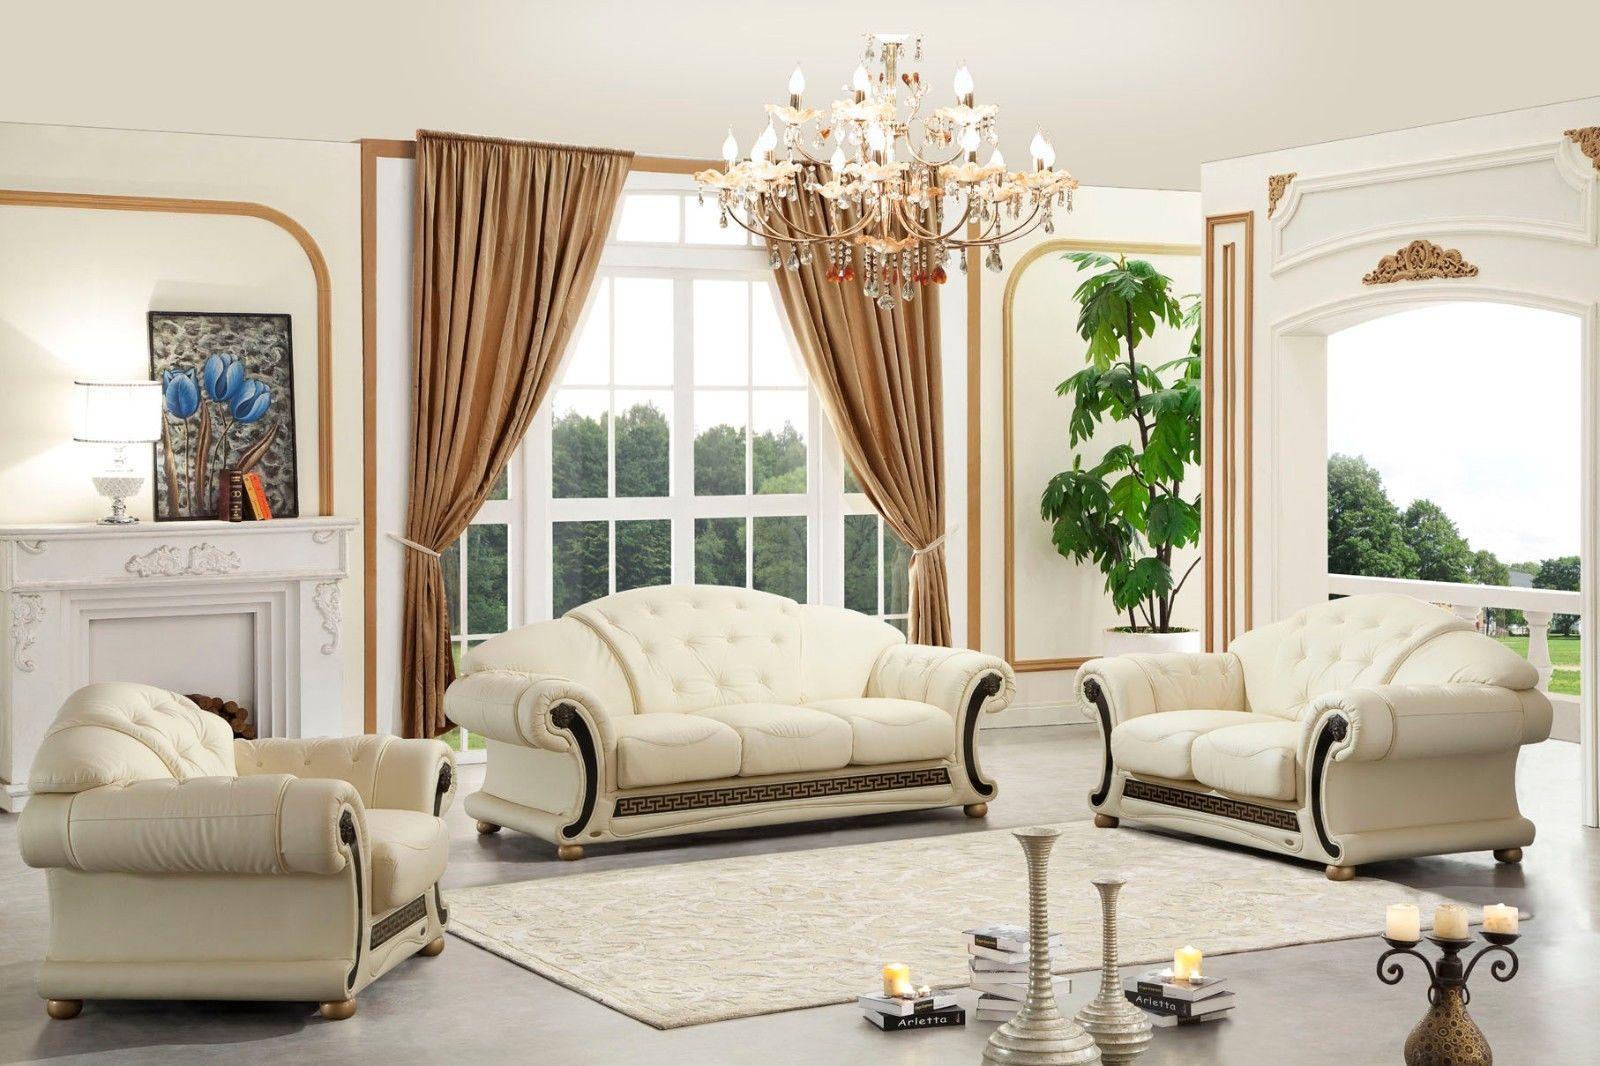 Traditional Beige Sofa V.Cleopatra Leather Chair 3pcs Loveseat on Outlet – Furniture buy online Soflex NY